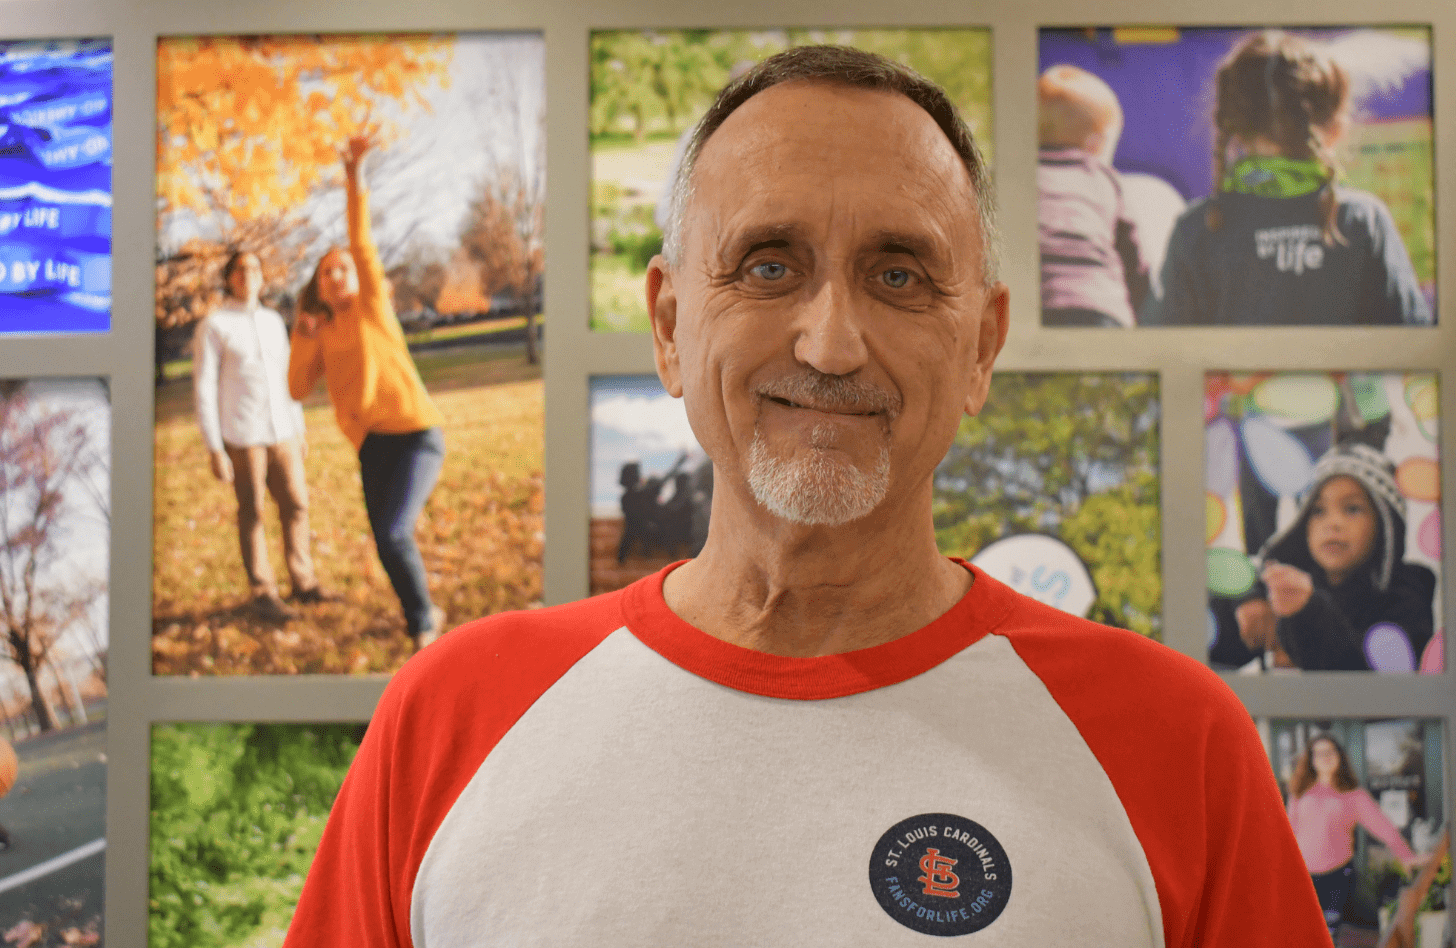 Keith, an employee at Mid-America Transplant, stands in the building's lobby. He is wearing a Fans for Life t-shirt and behind him is a photo collage of organ recipients.